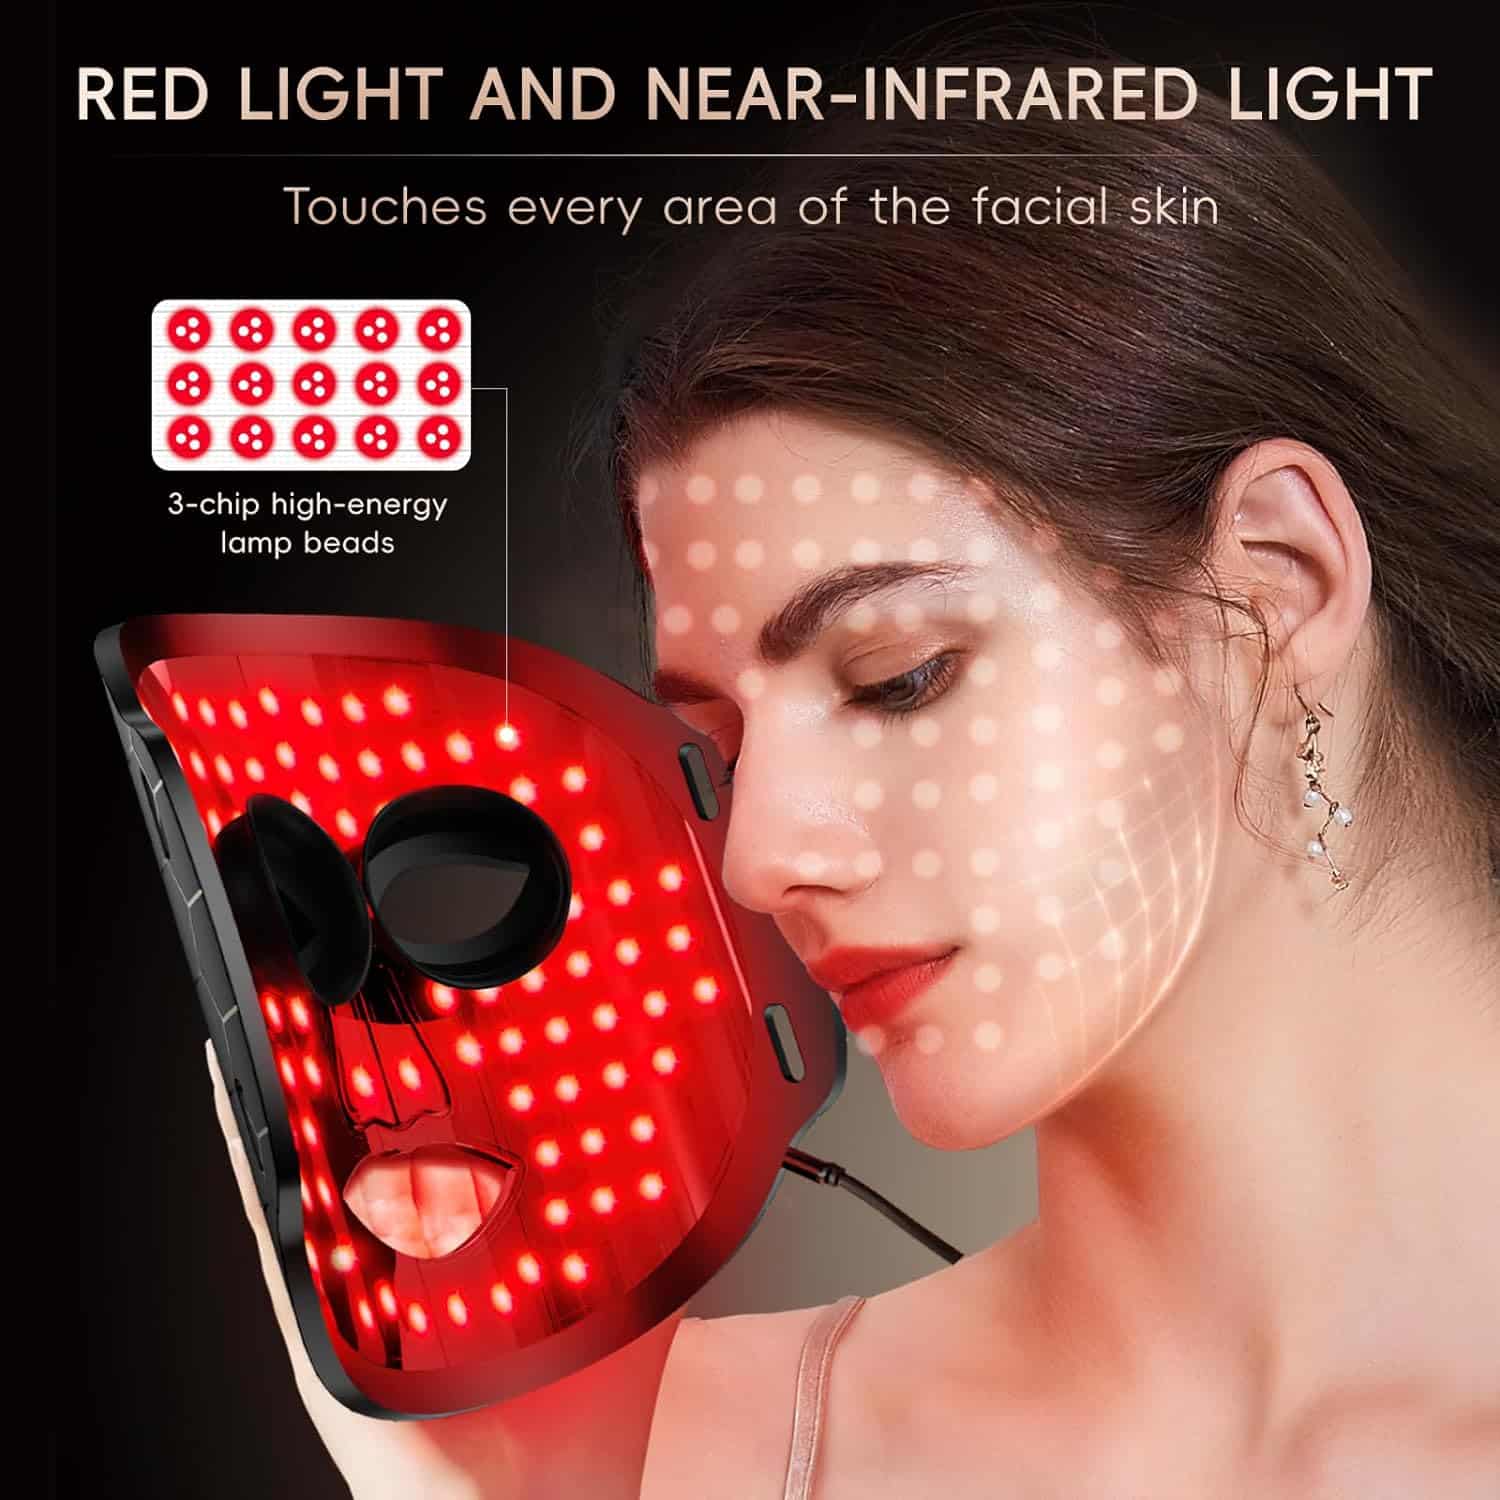 MDHAND Red Light Therapy For Face, 7 Colors Led Face Mask Light Therapy, Red Light Therapy Mask For Face, LED Mask Therapy Facial Skincare at Home and Travel